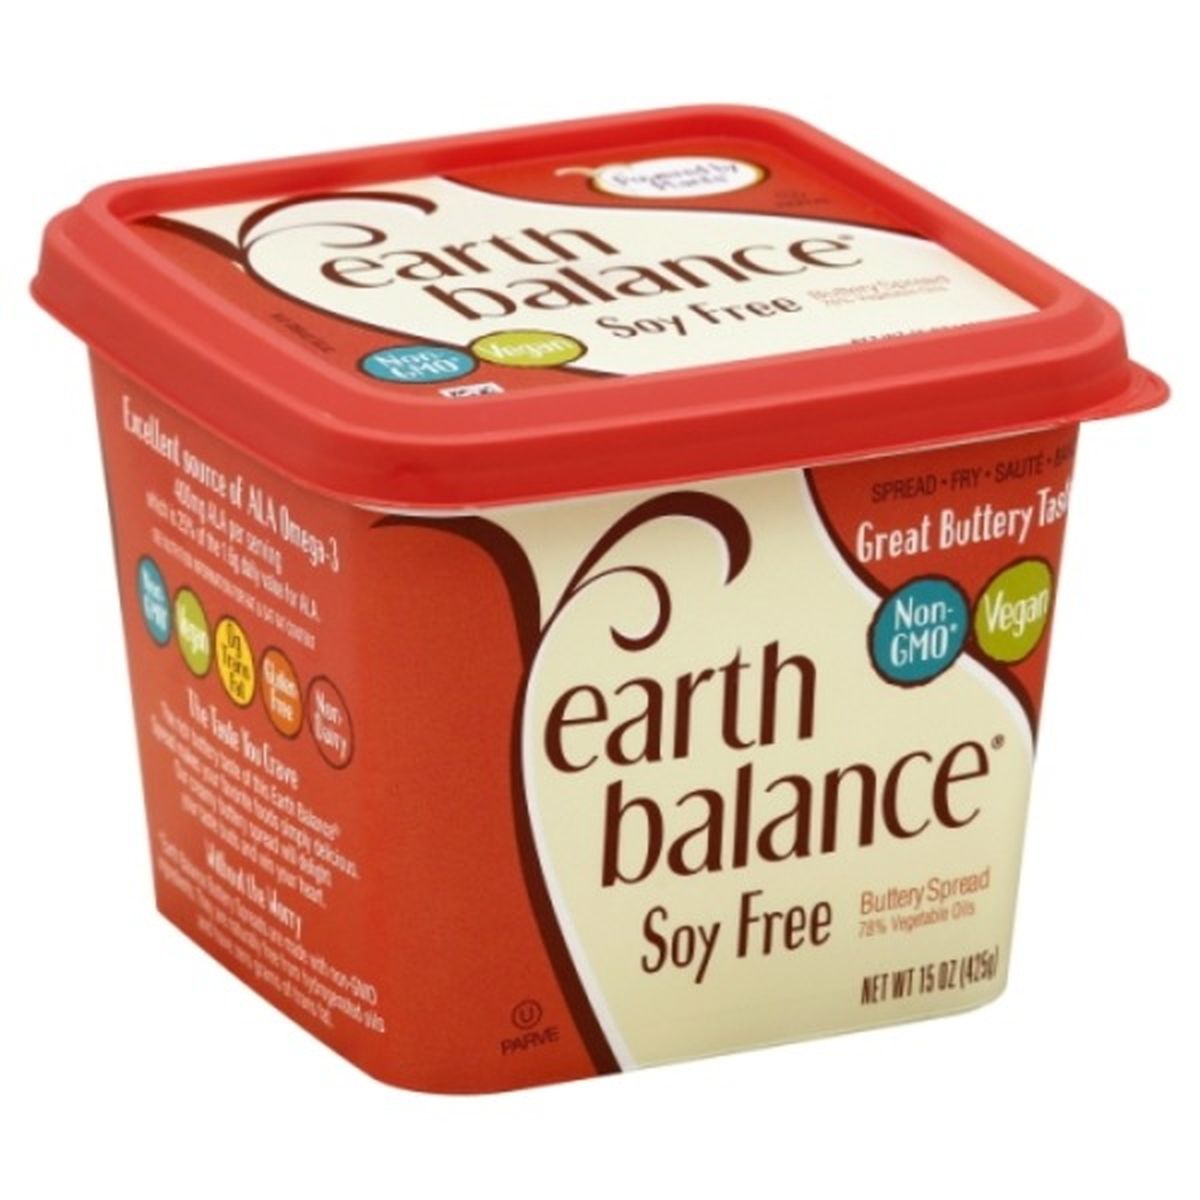 Calories in Earth Balance Buttery Spread, Soy Free